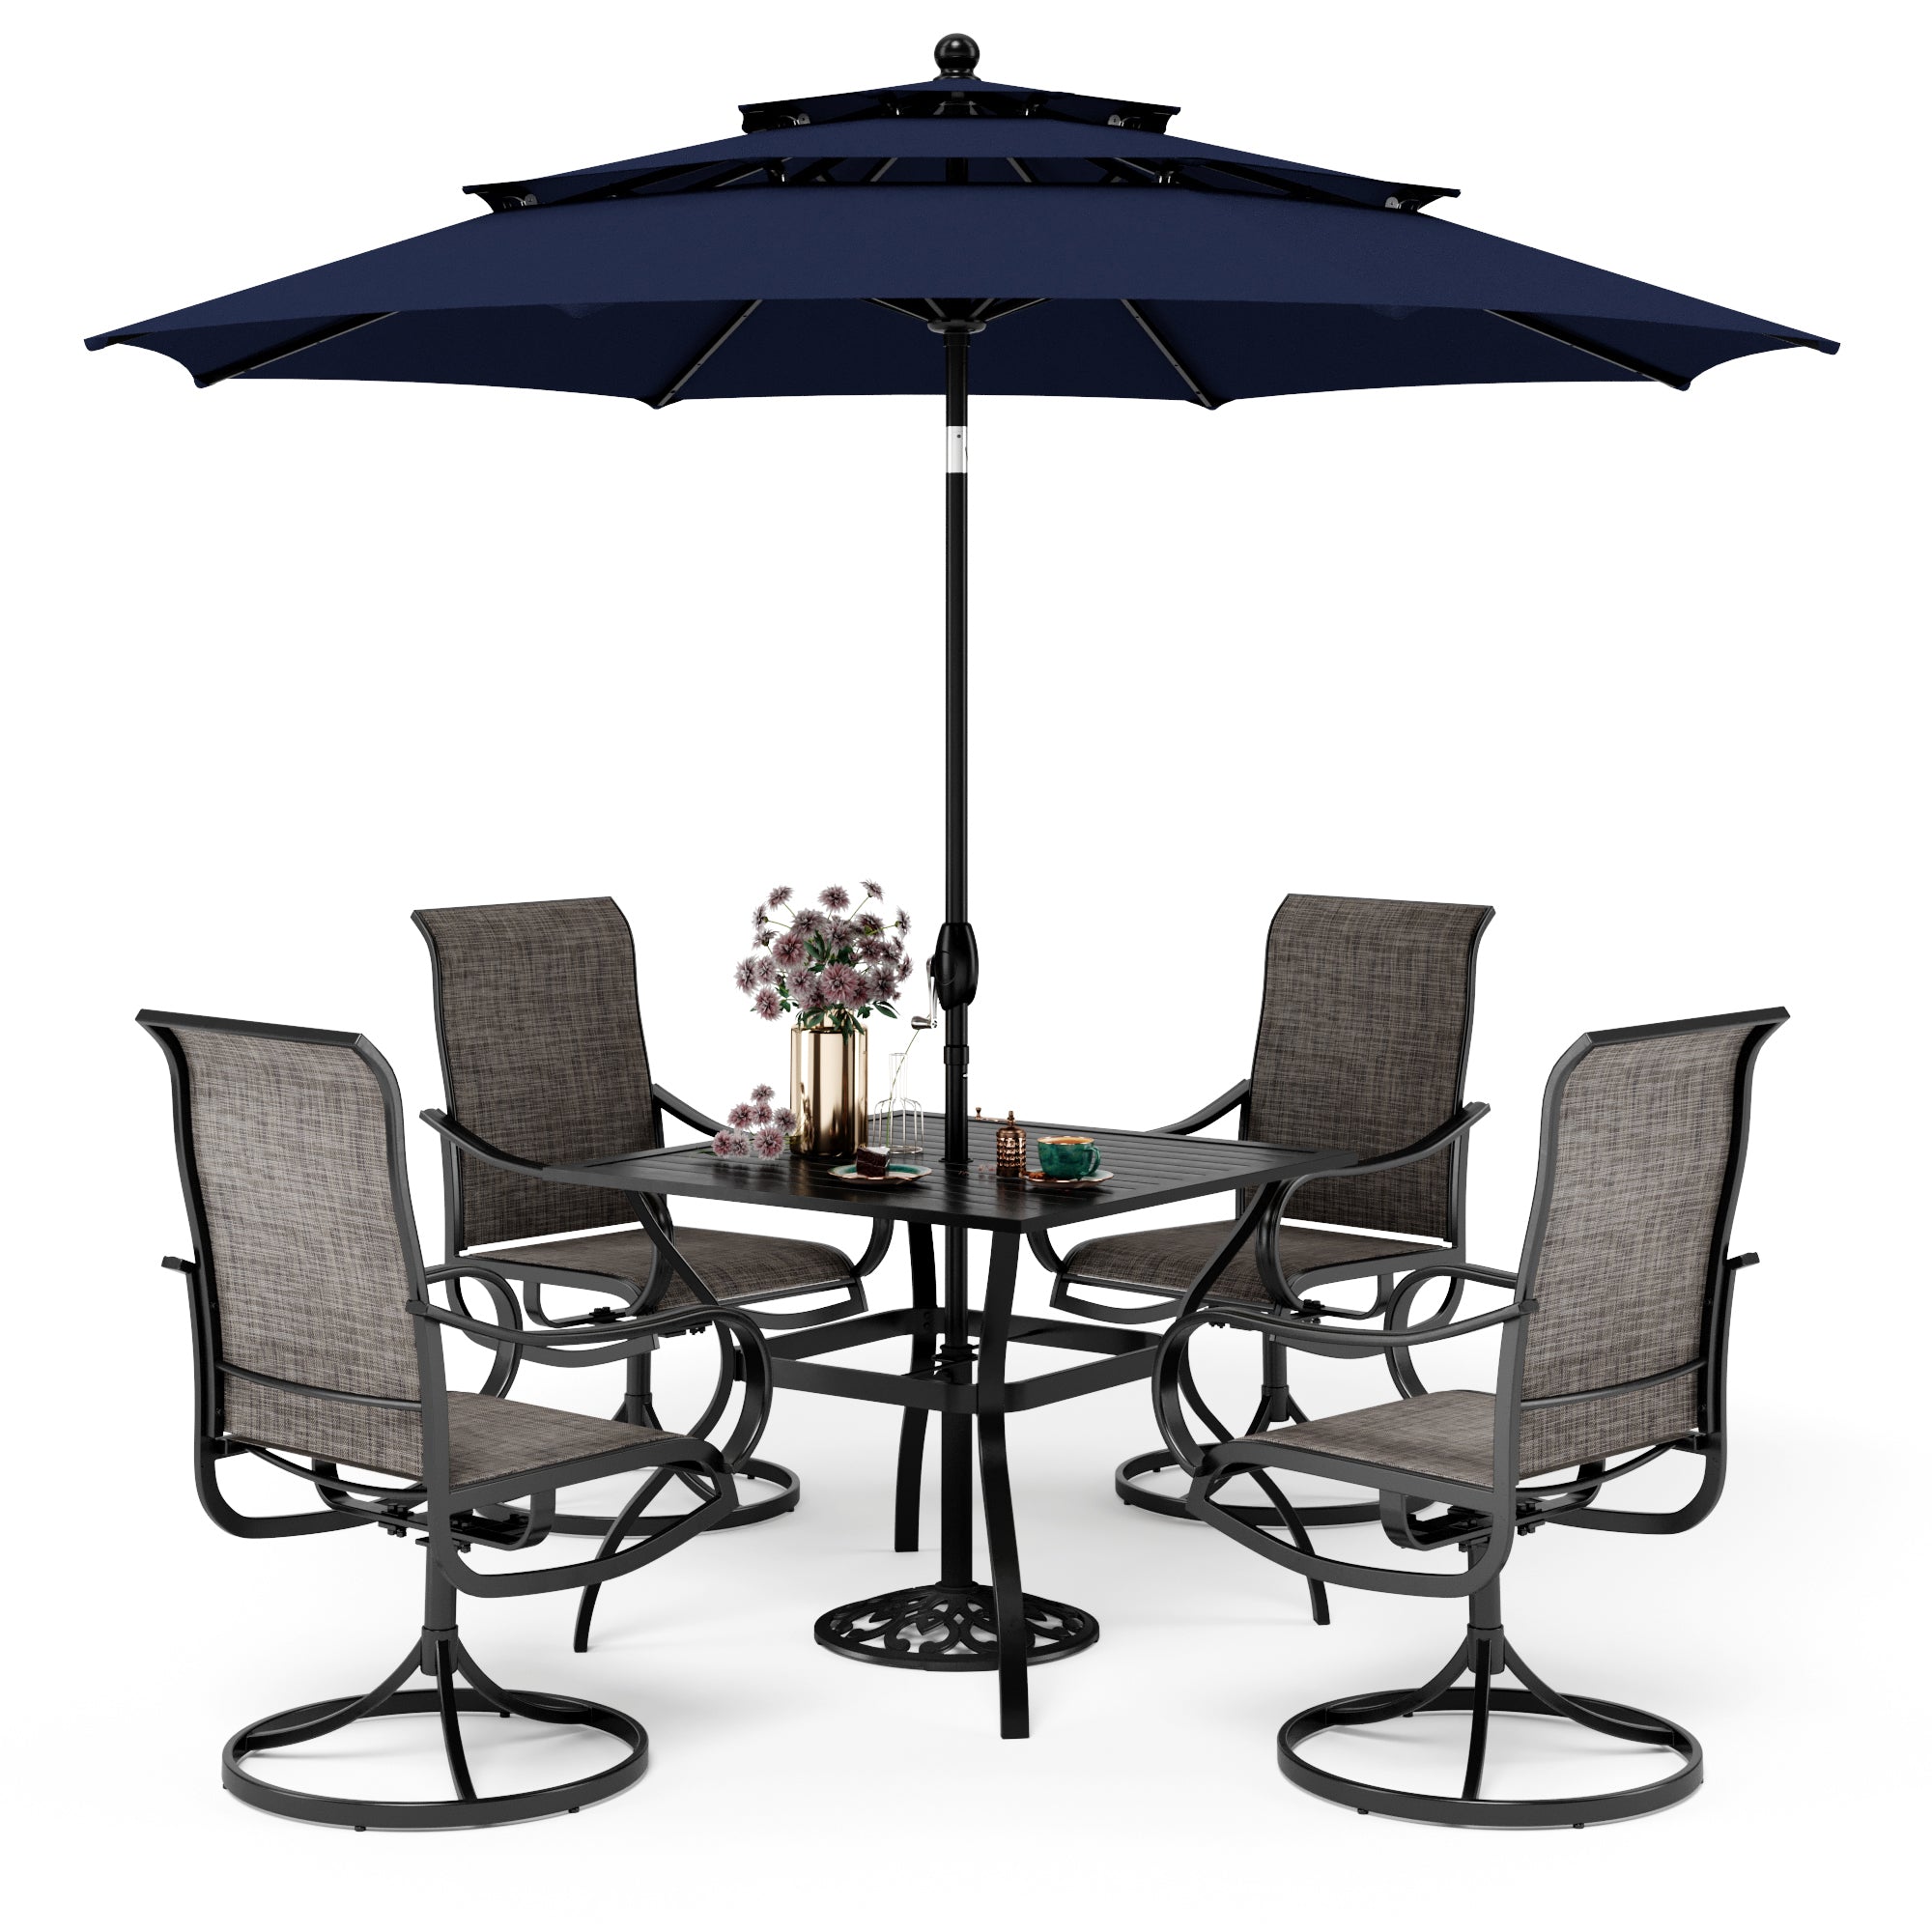 PHI VILLA 6-Piece Patio Dining Set with an Umbrella Steel Square Table & Textilene Swivel Chairs